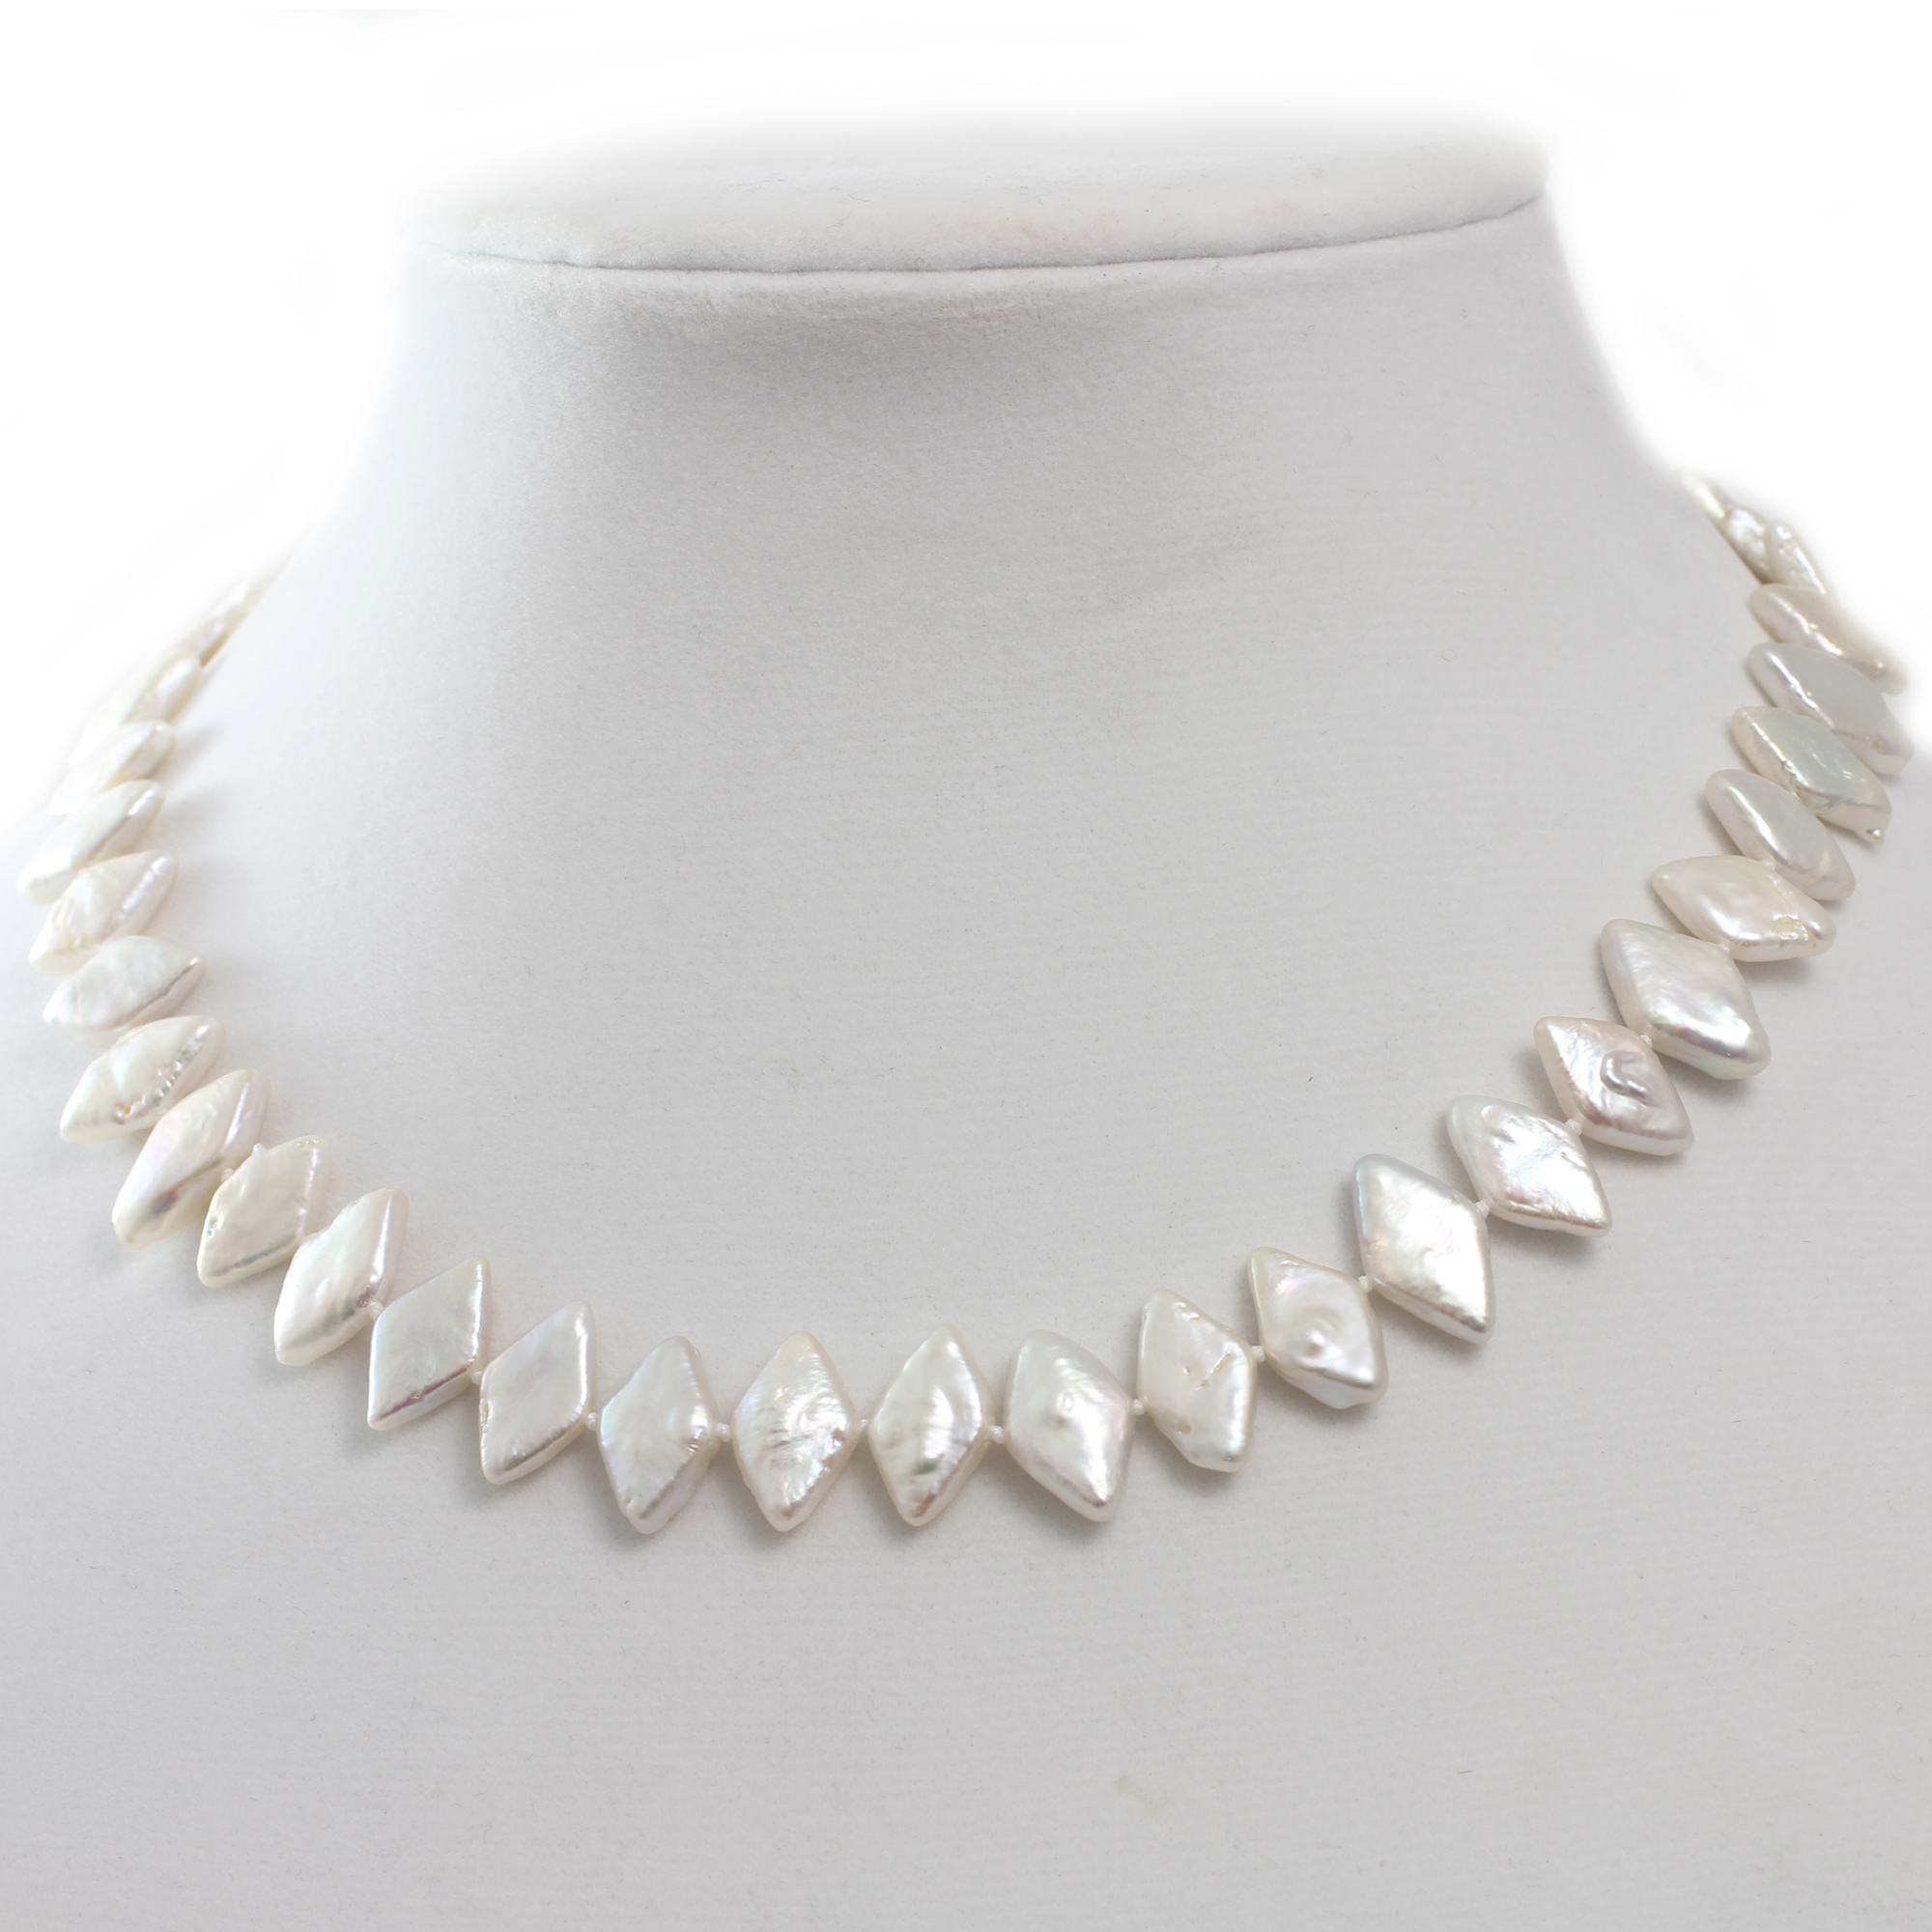 Orien Jewelry Exquisite Baroque Pearl Necklace Diamond Shaped White Freshwater Pearl Necklace 16-22 Inch One of Kind White Pearl Necklace 